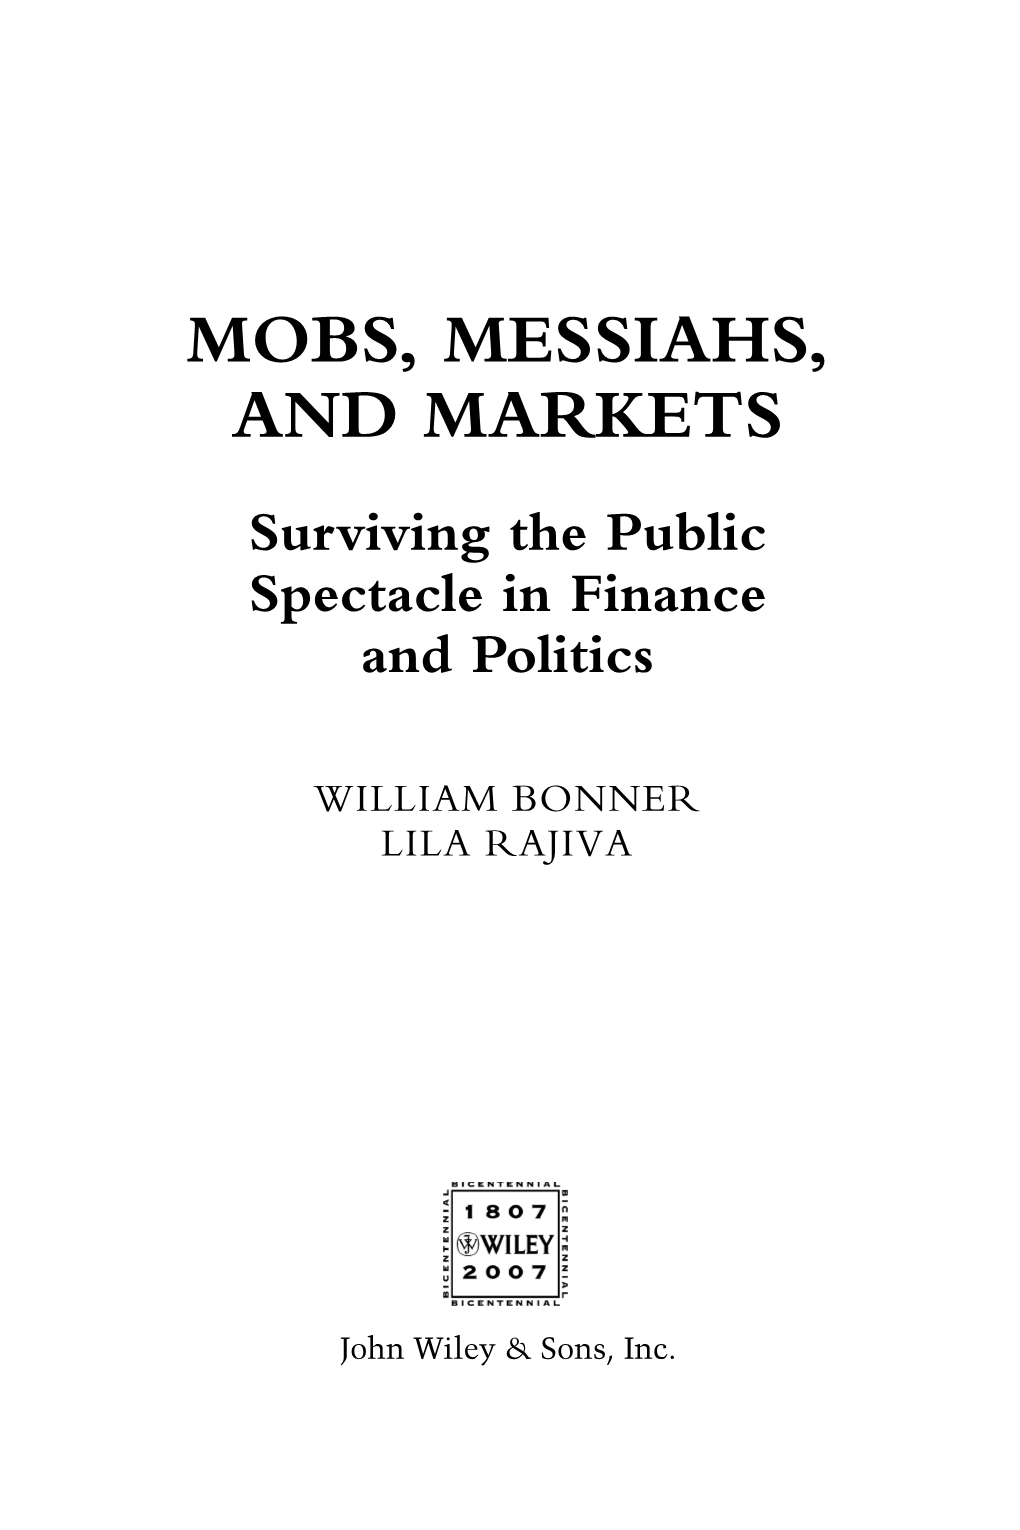 MOBS, MESSIAHS, and MARKETS Surviving the Public Spectacle in Finance and Politics